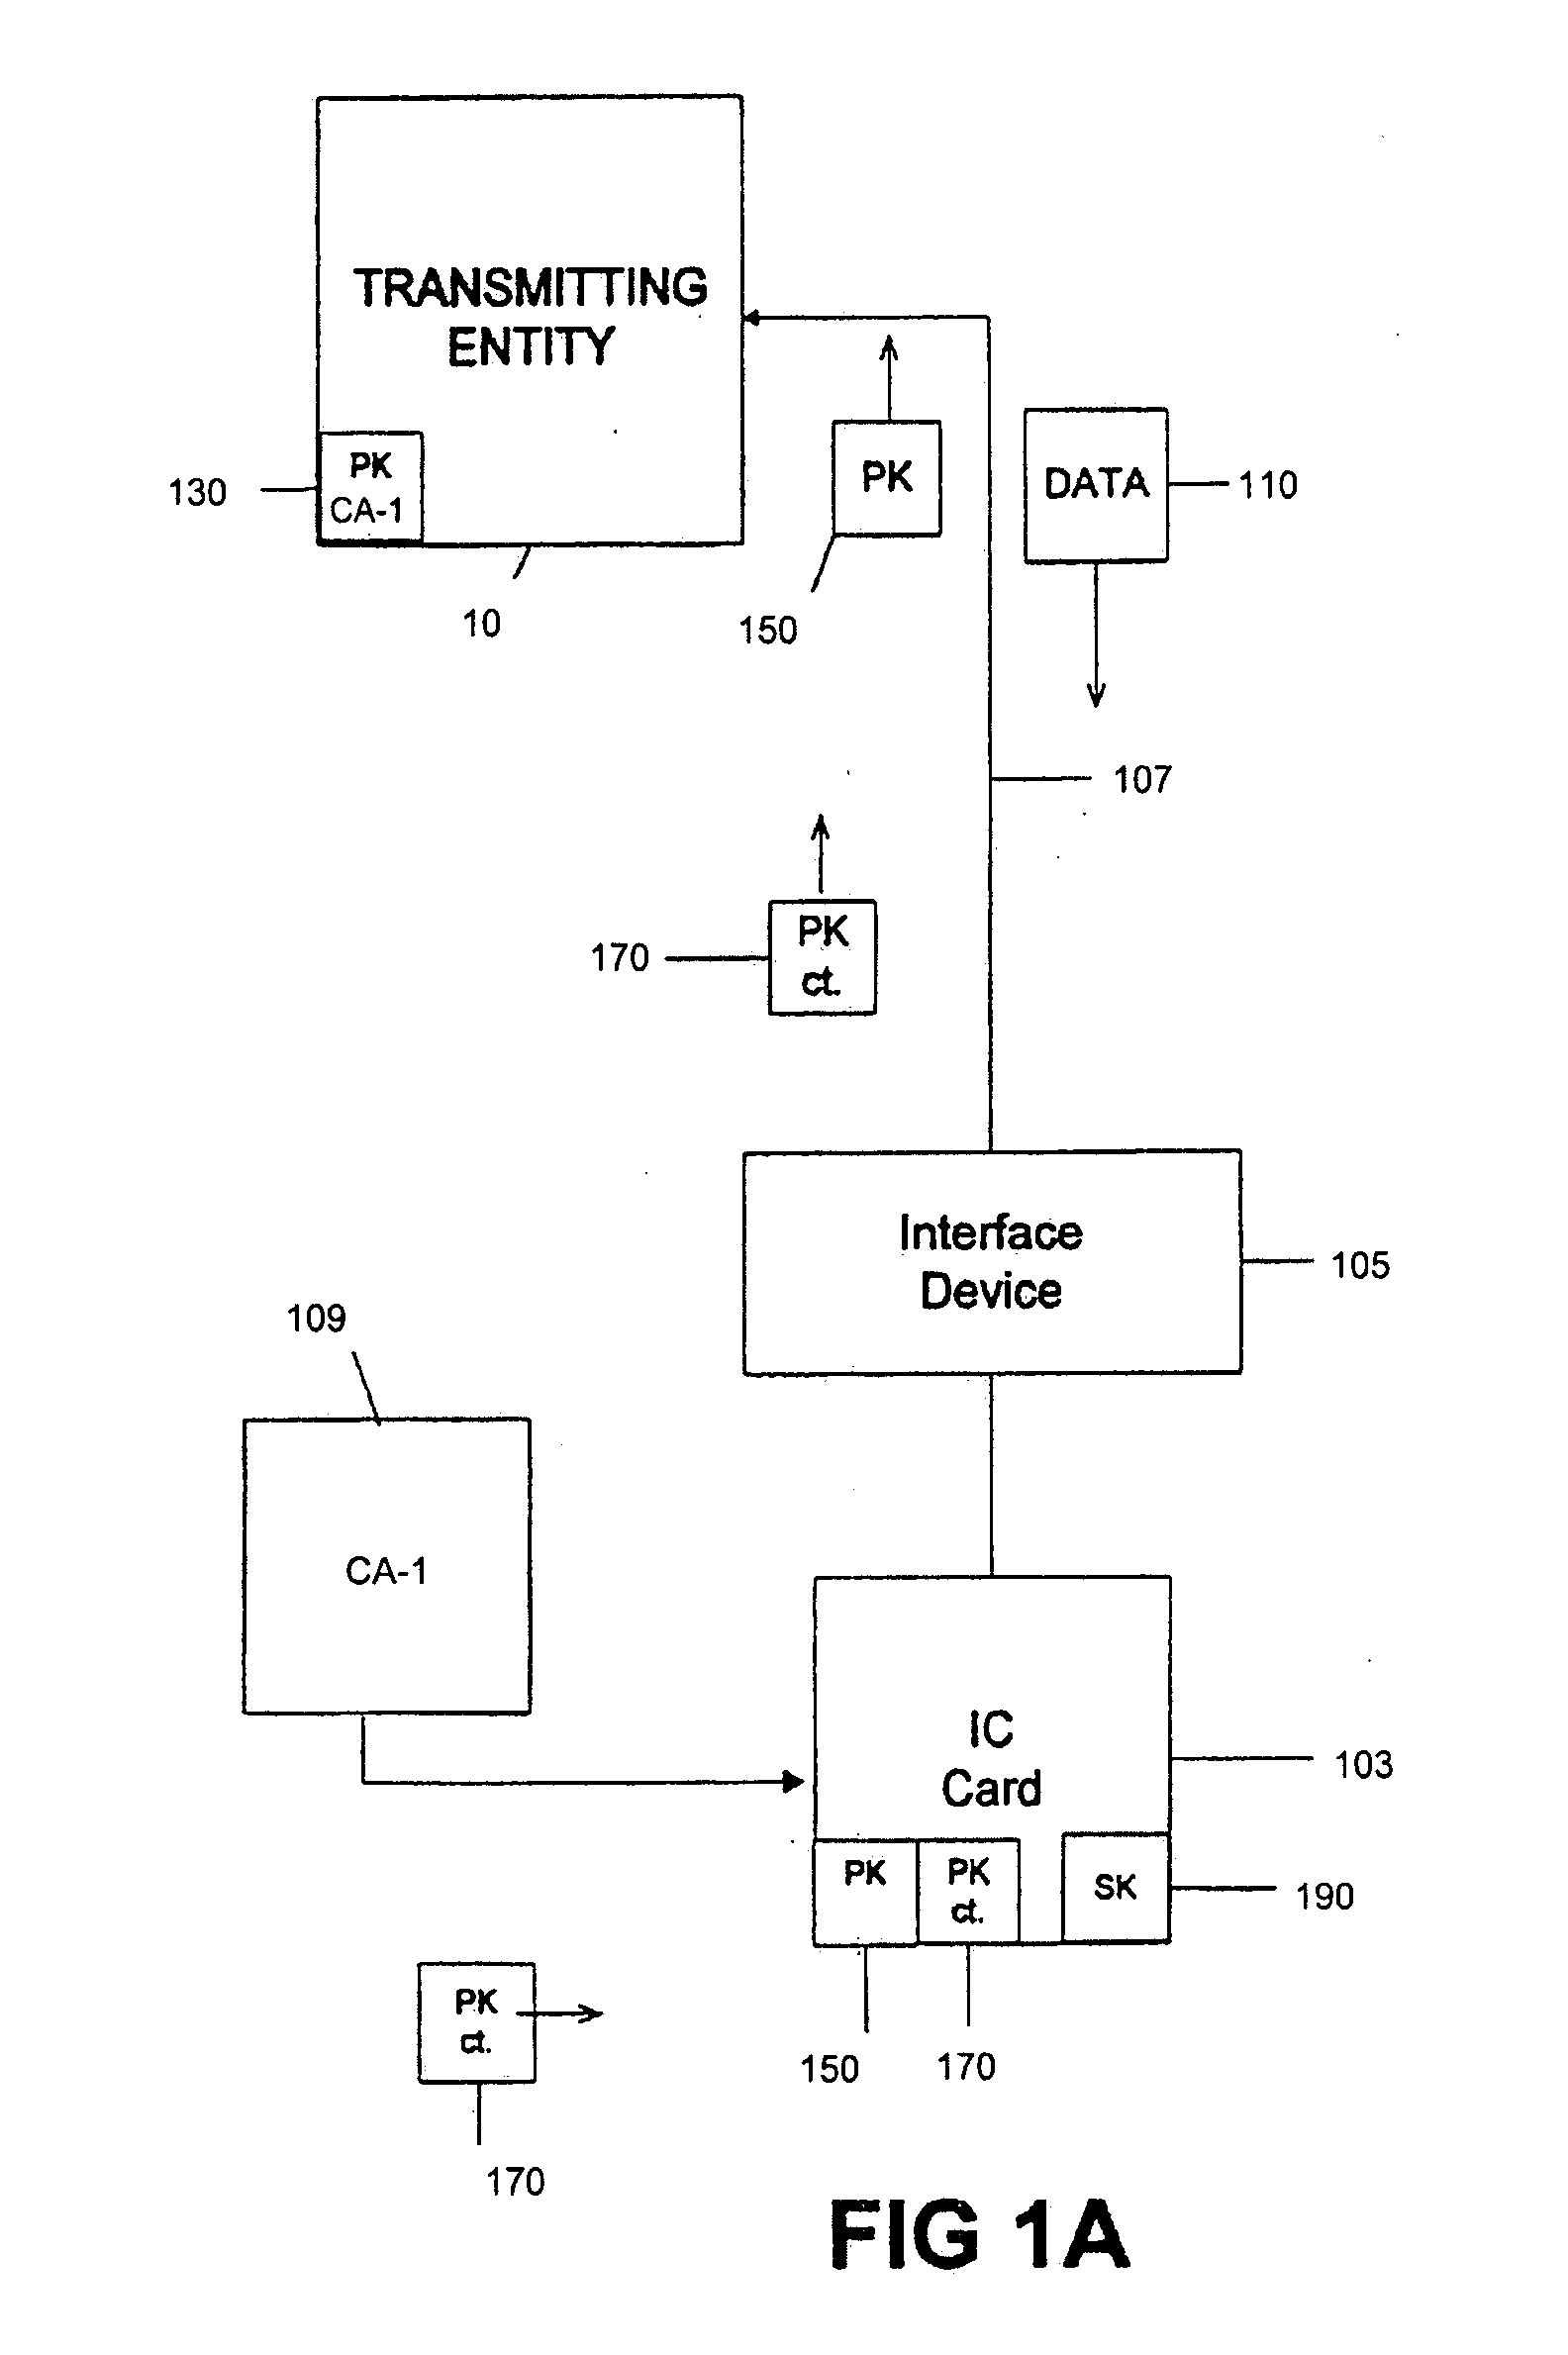 Tamper resistant module having separate control of issuance and content delivery